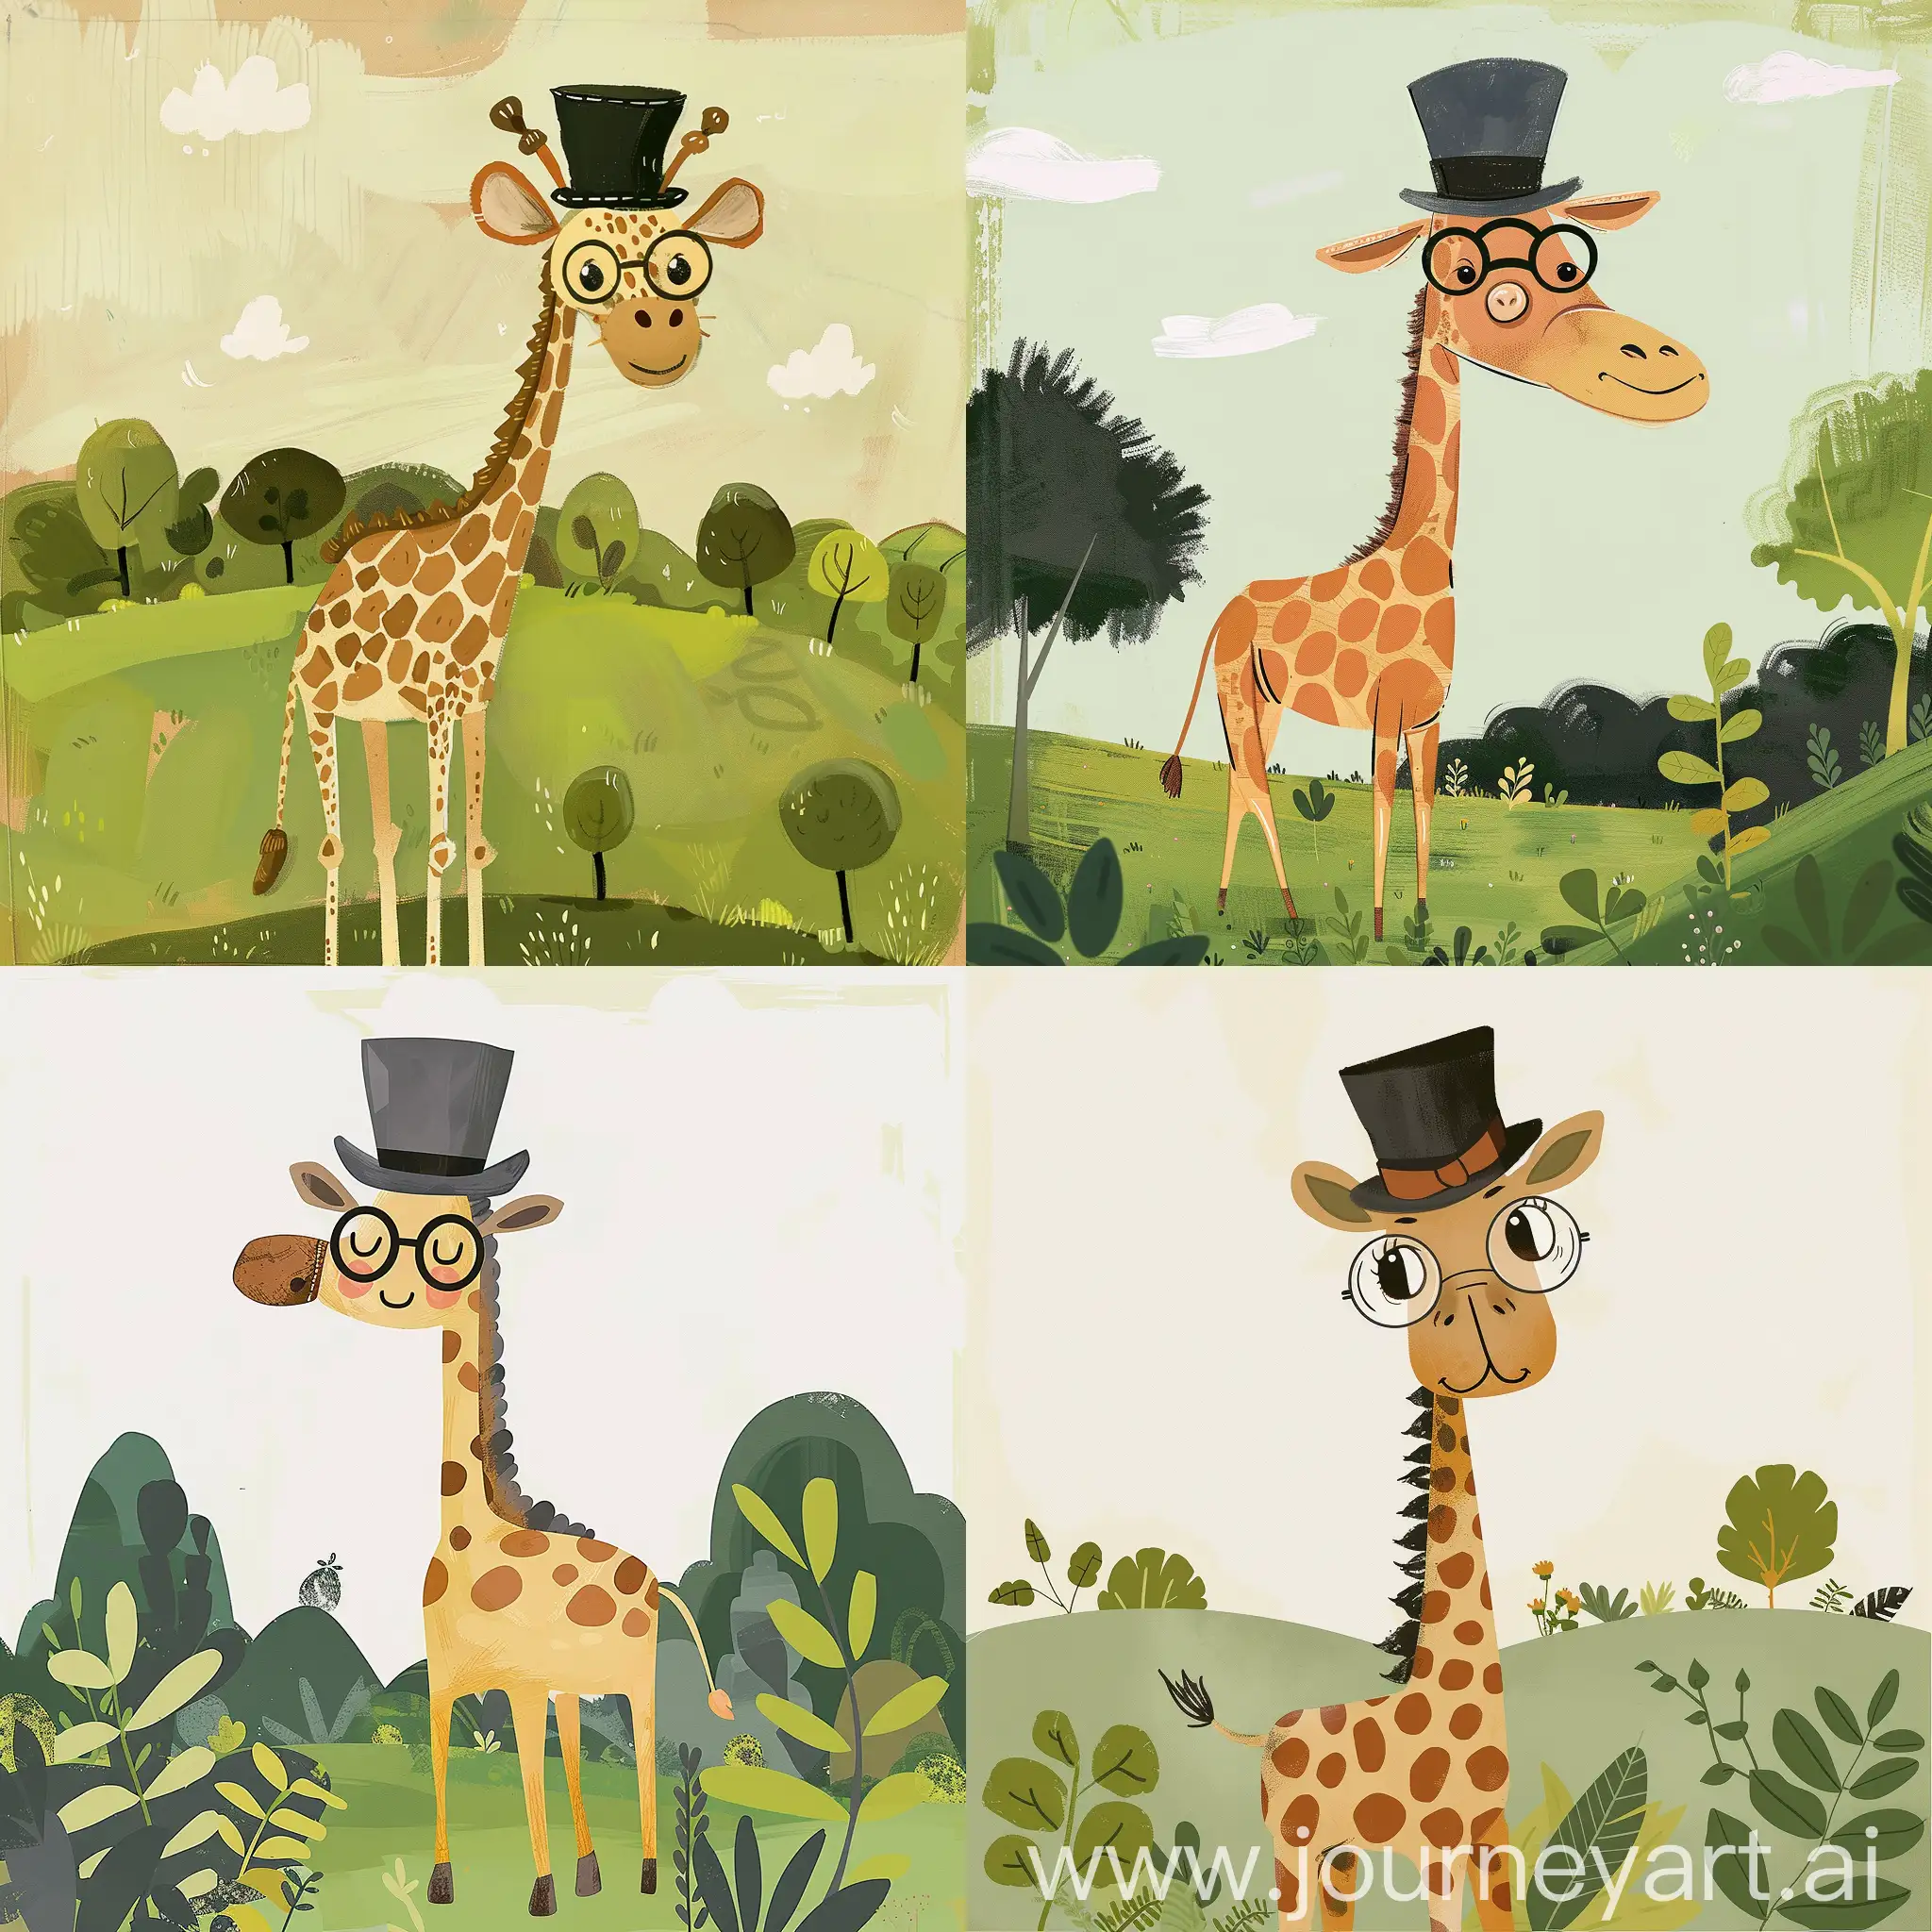 Charming-Giraffe-in-Top-Hat-and-Glasses-Amidst-Lush-Green-Landscape